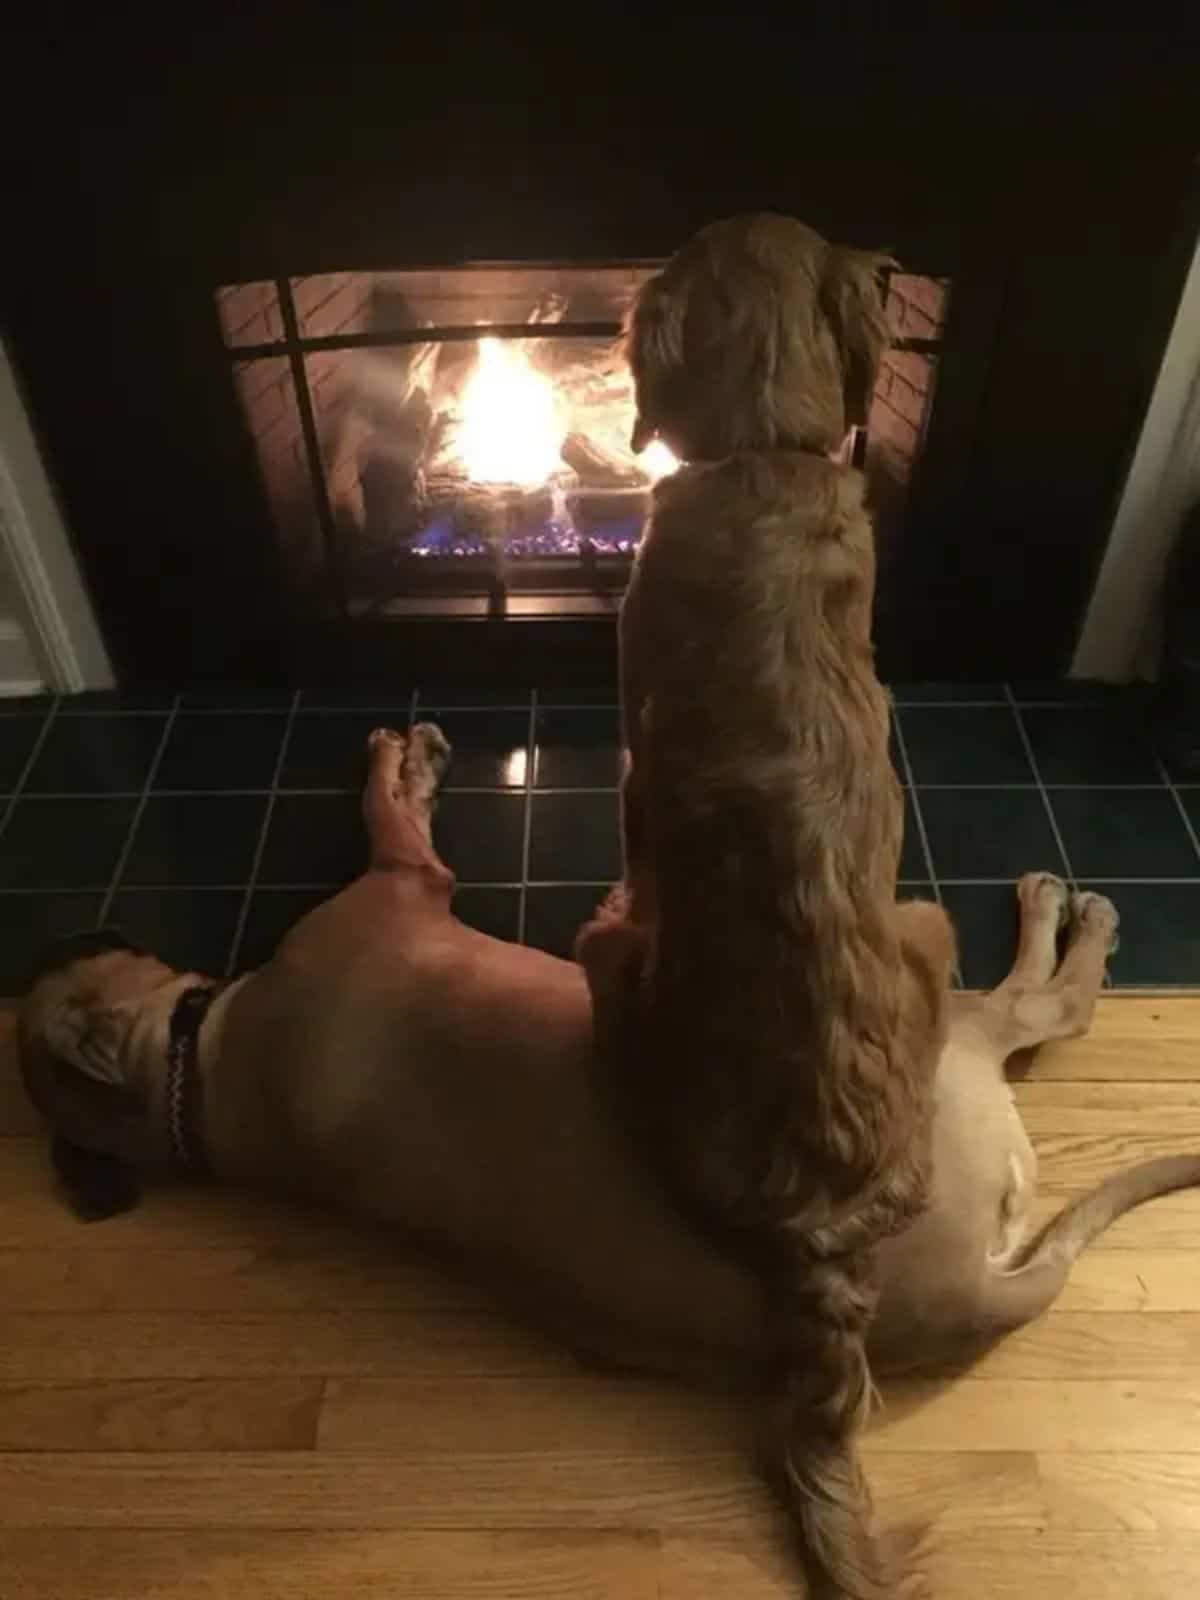 fluffy brown dog sitting on a brown dog laying on the floor in front of a fireplace